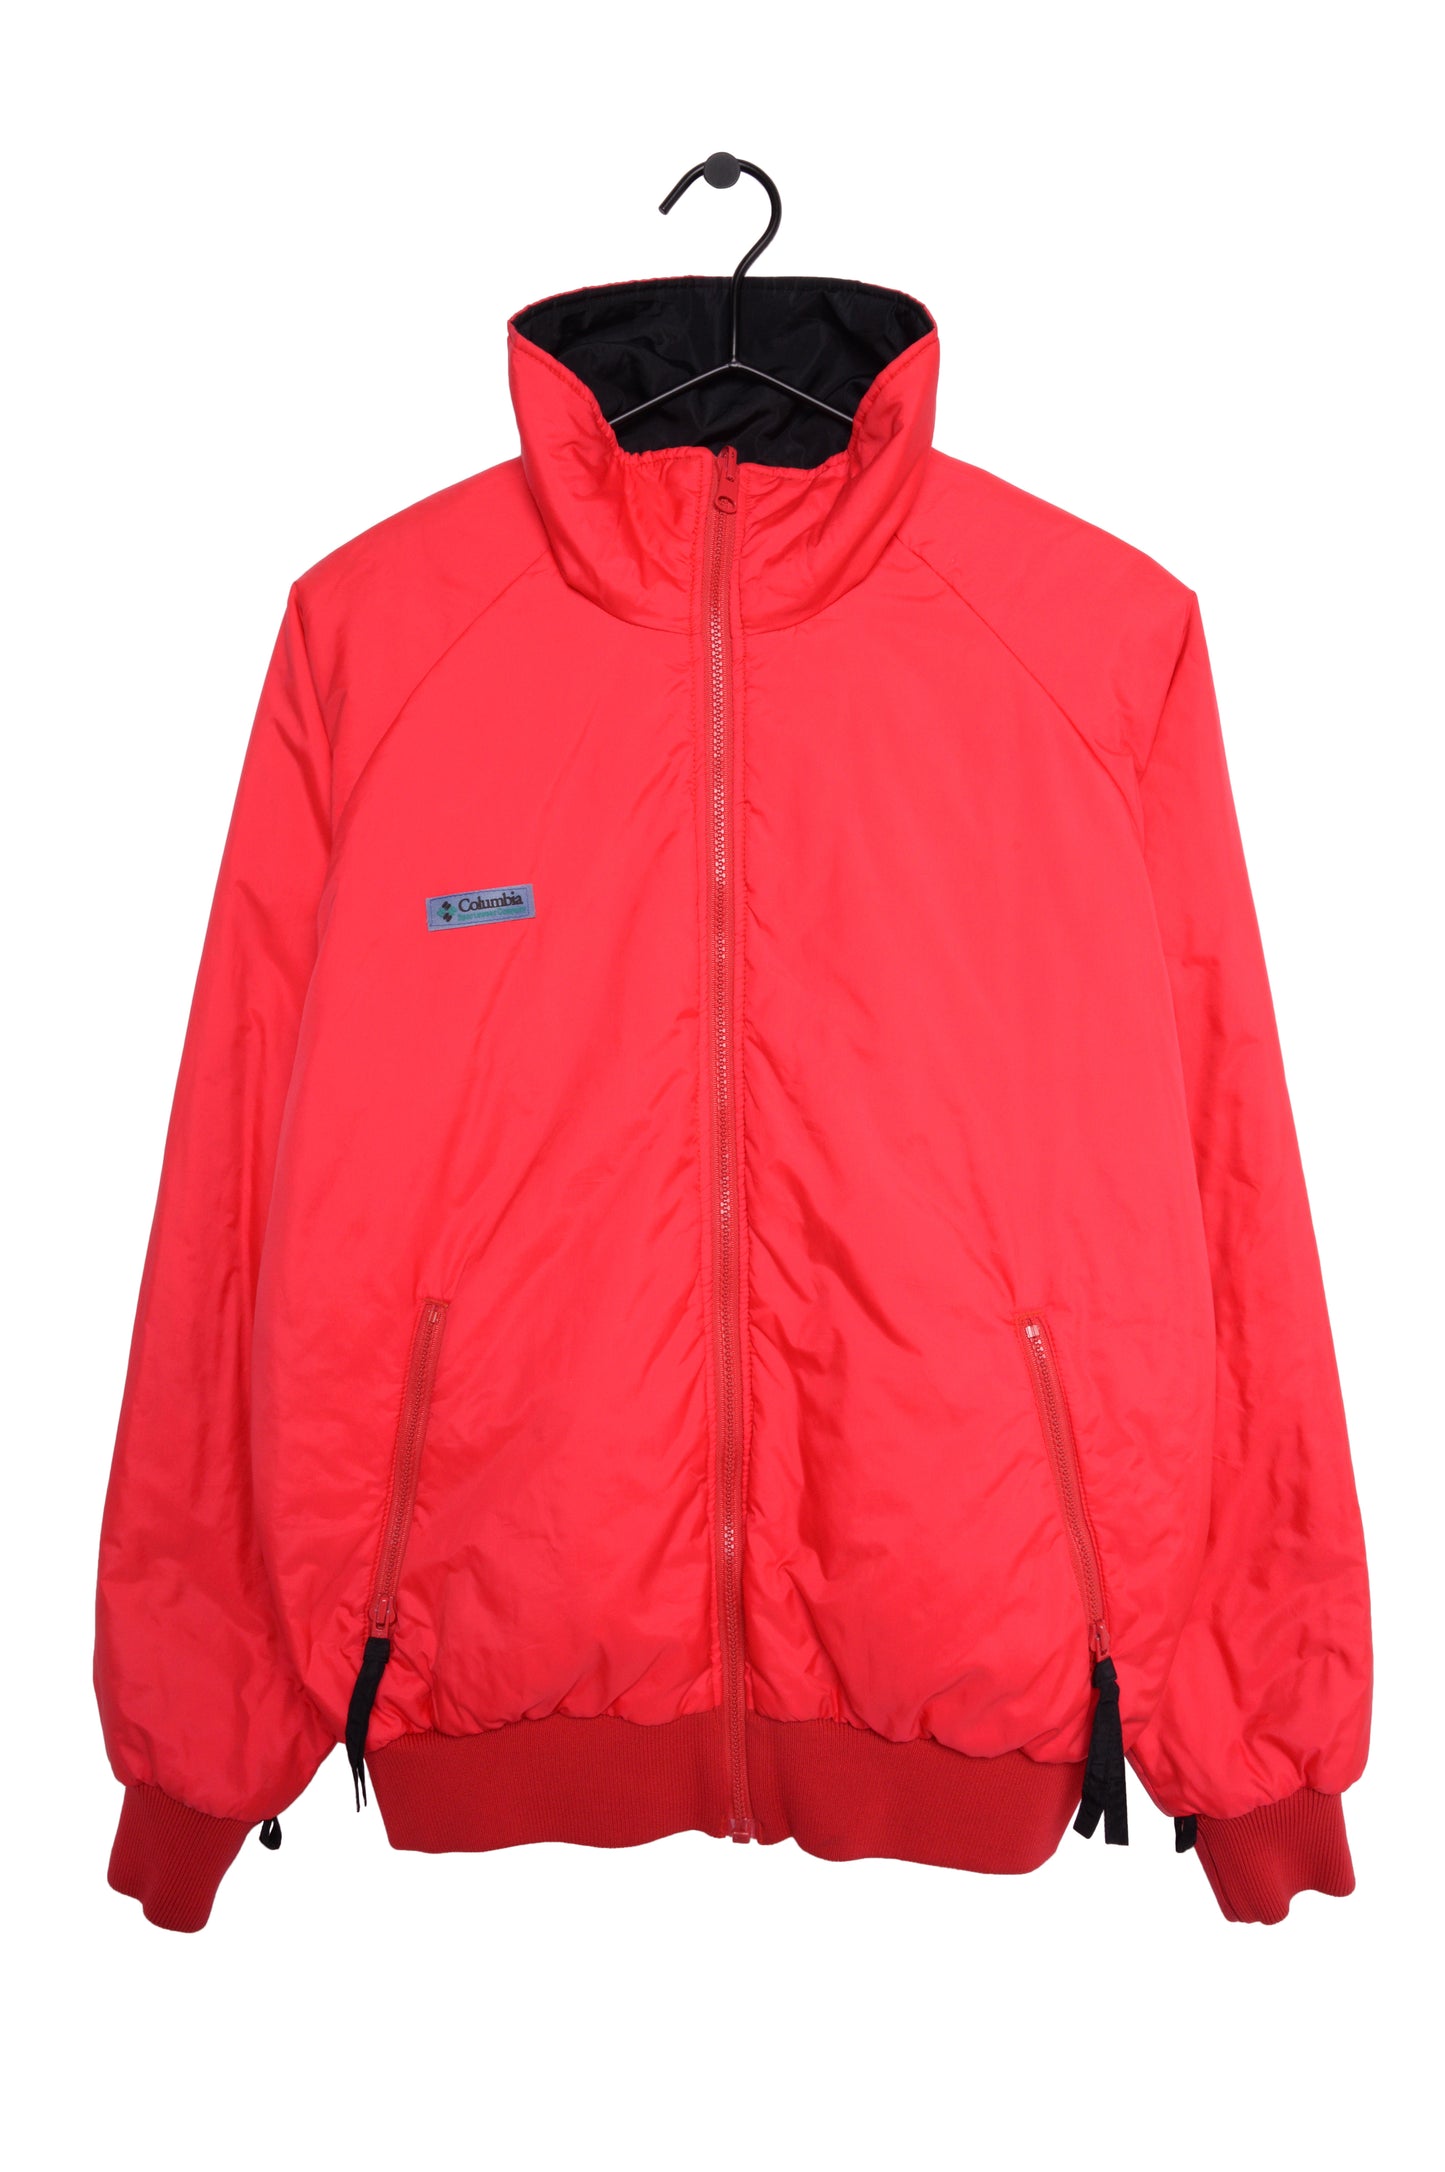 1990s Columbia 3-in-1 Jacket